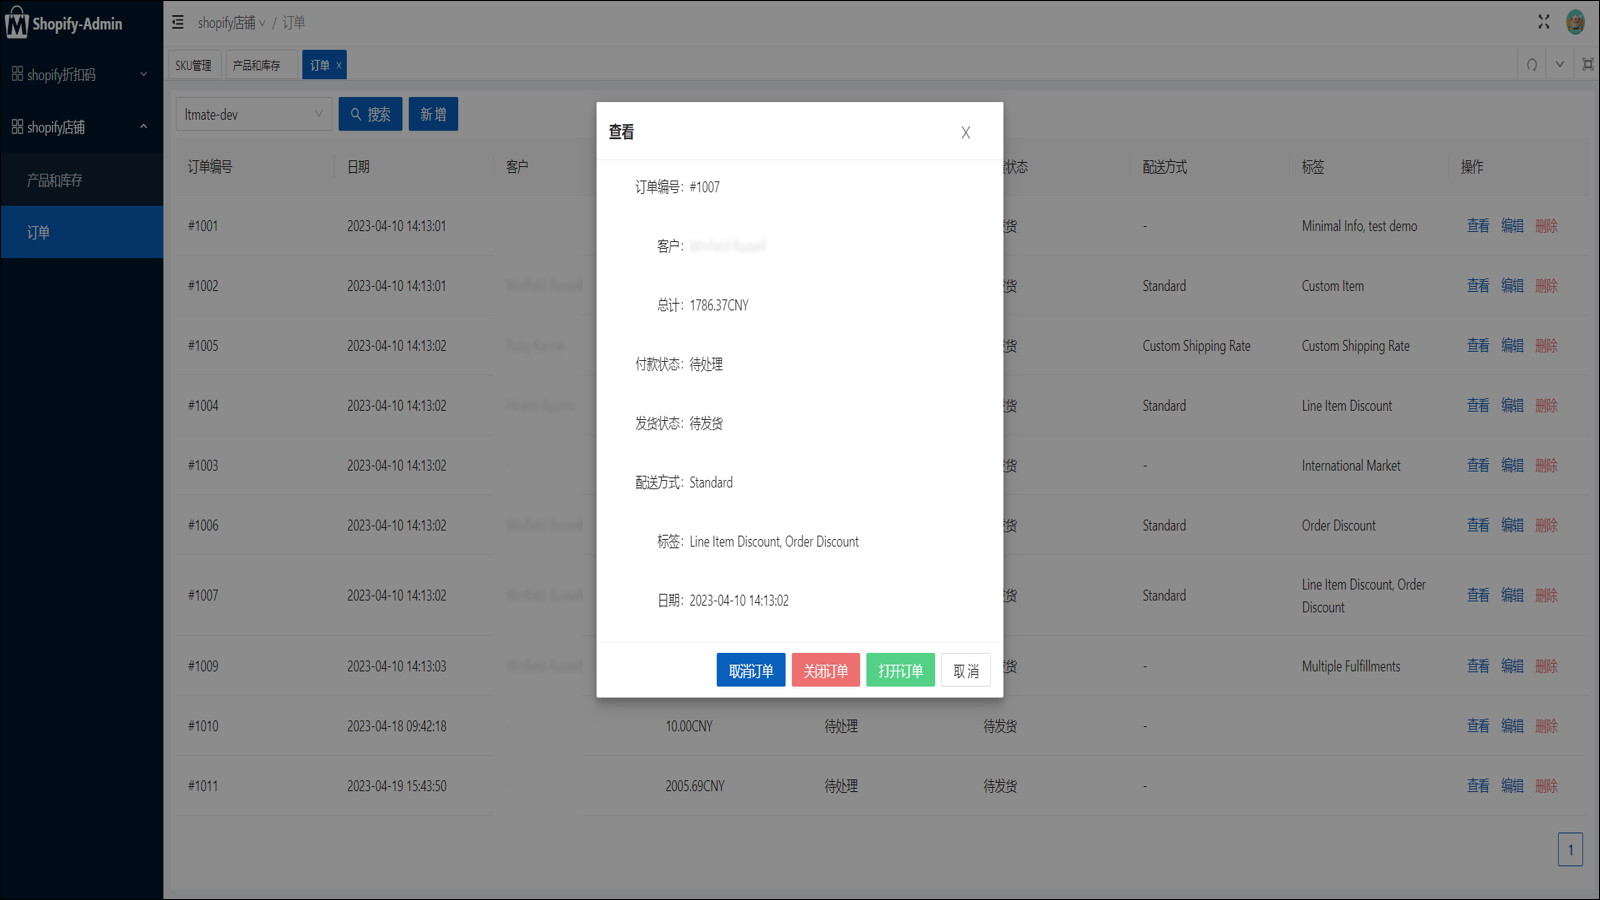  Easily manage orders from different stores